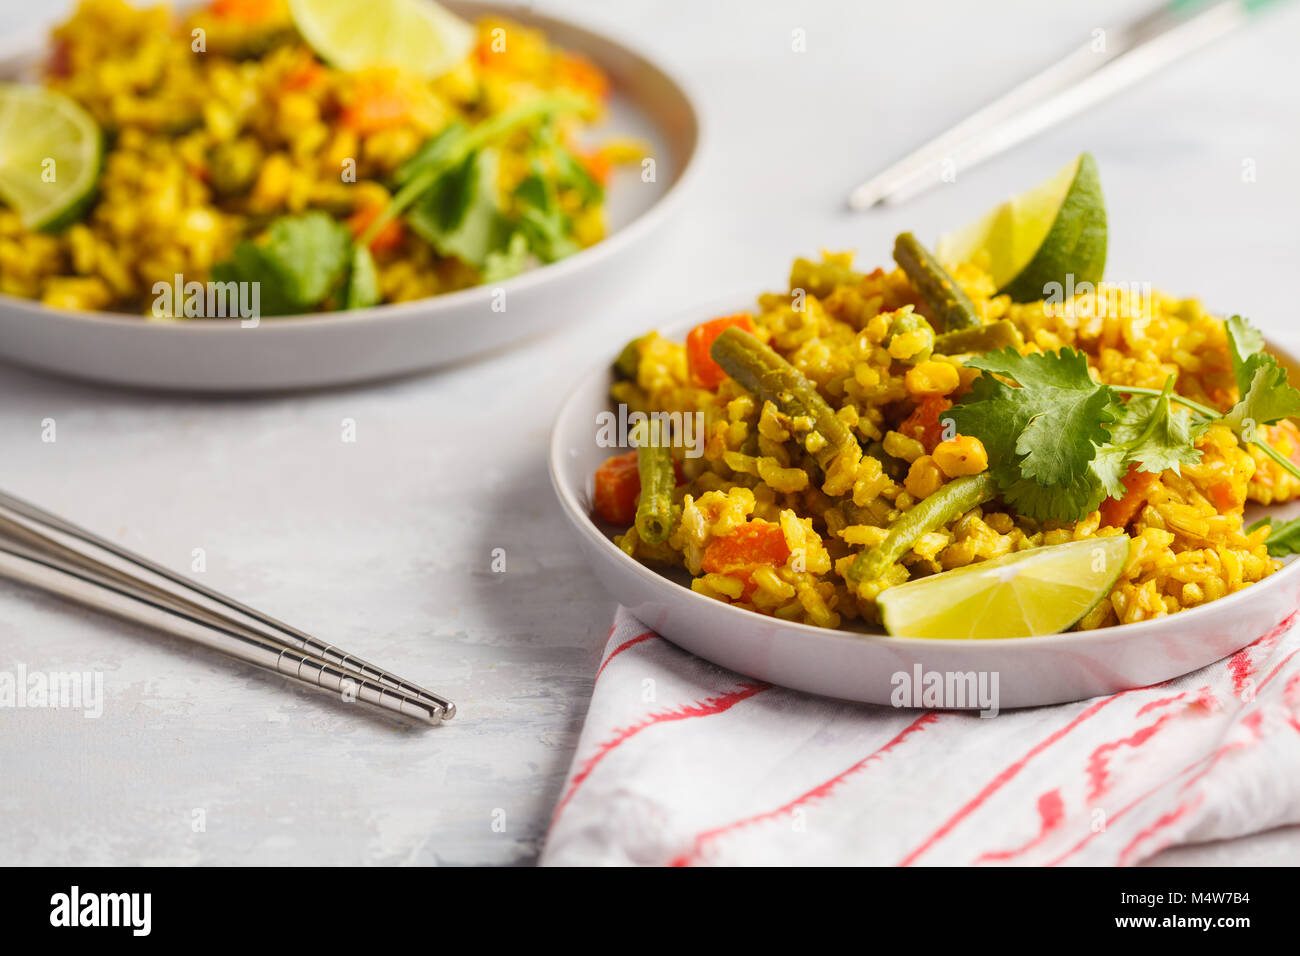 Vegetarian curry rice with vegetables and coconut cream. Healthy vegan food concept, detox, vegetable diet. Stock Photo